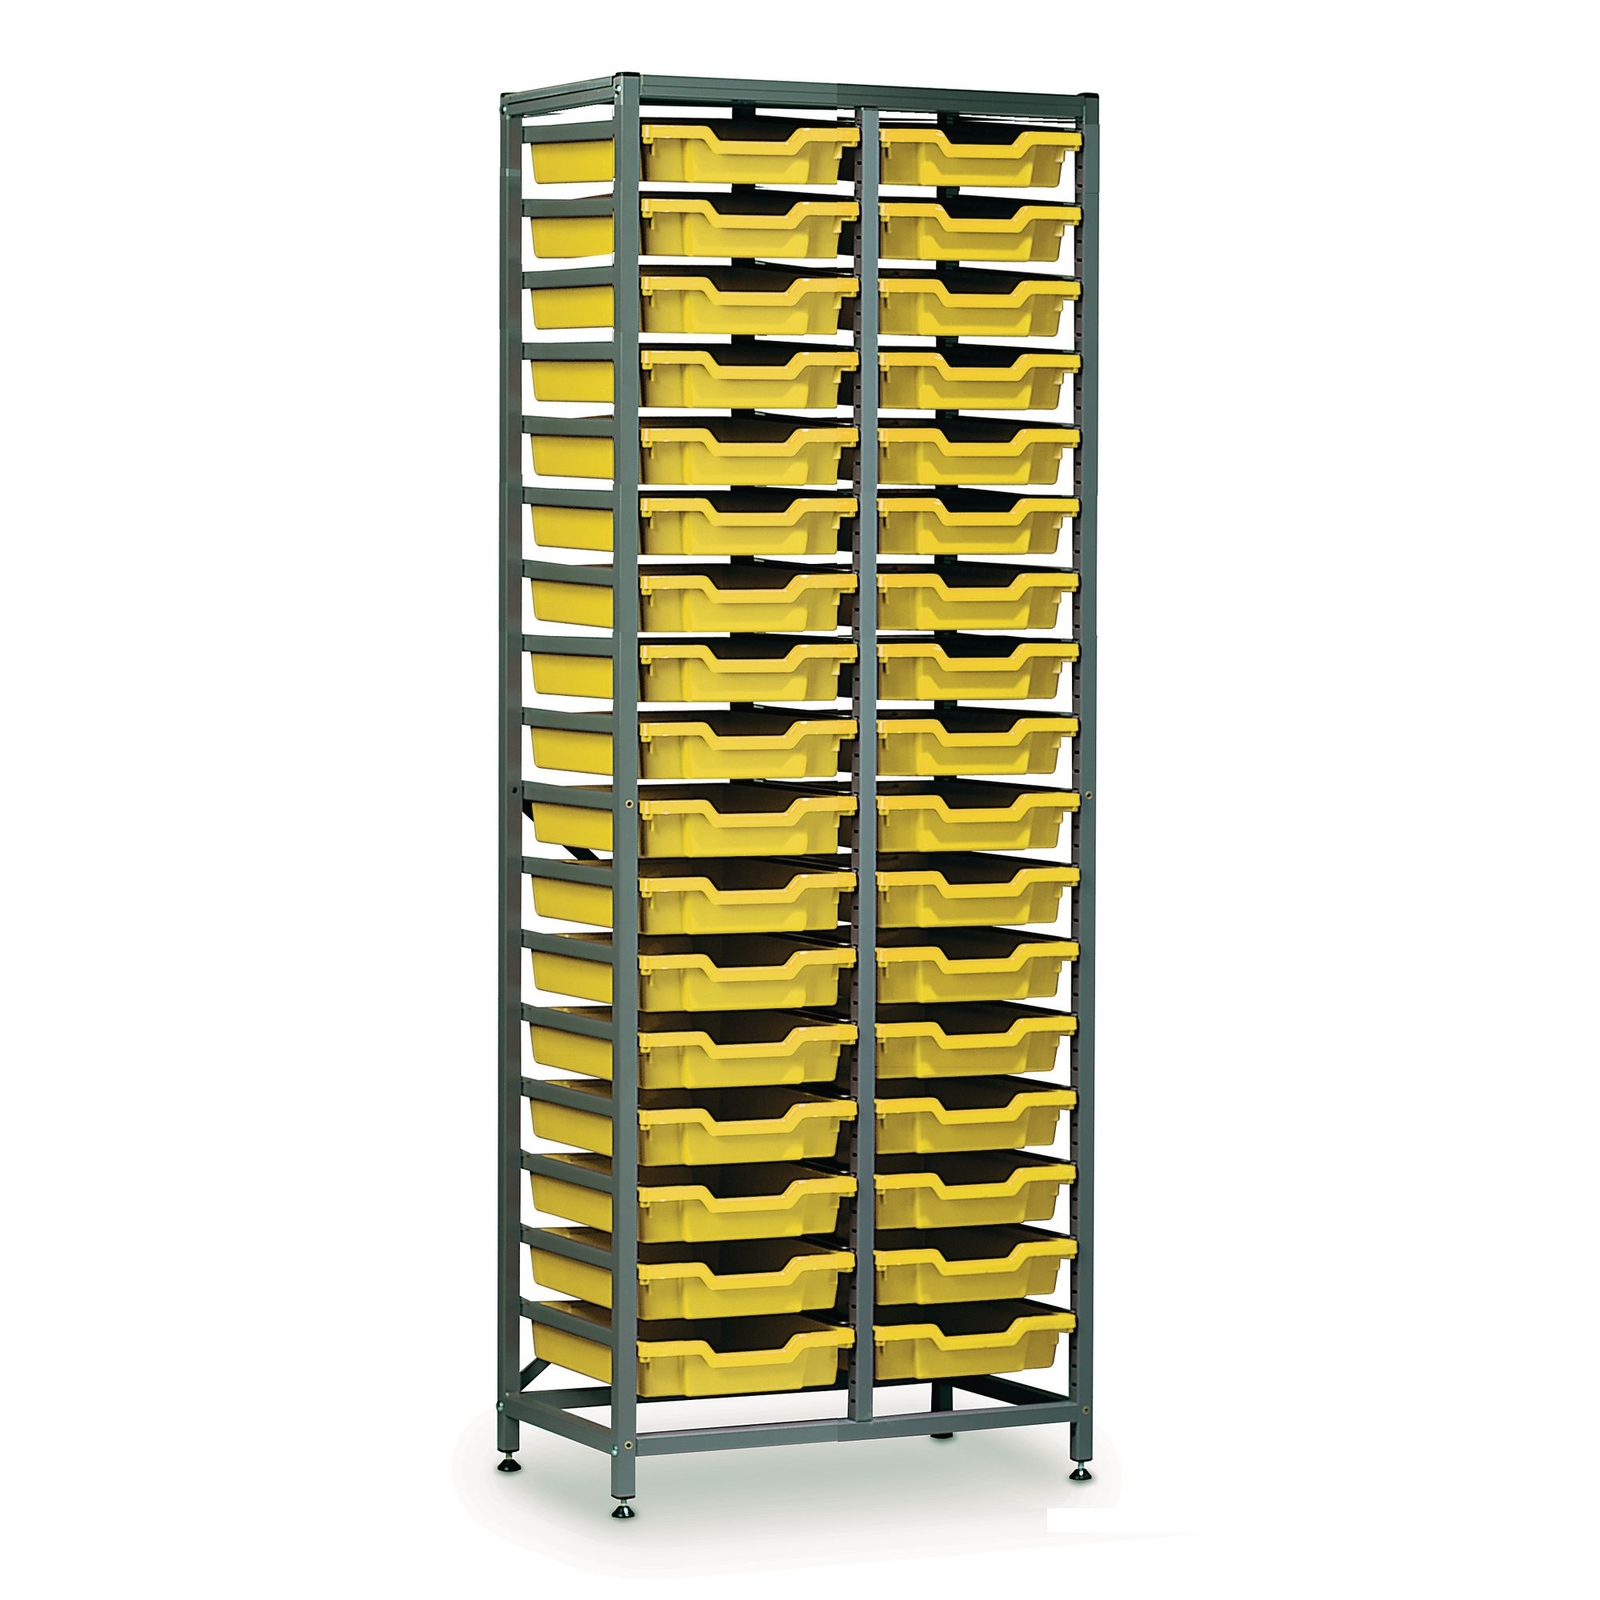 Gratnell Double Column Tall Shallow Tray Storage Frame - W710 x D420 x H1850mm - Each